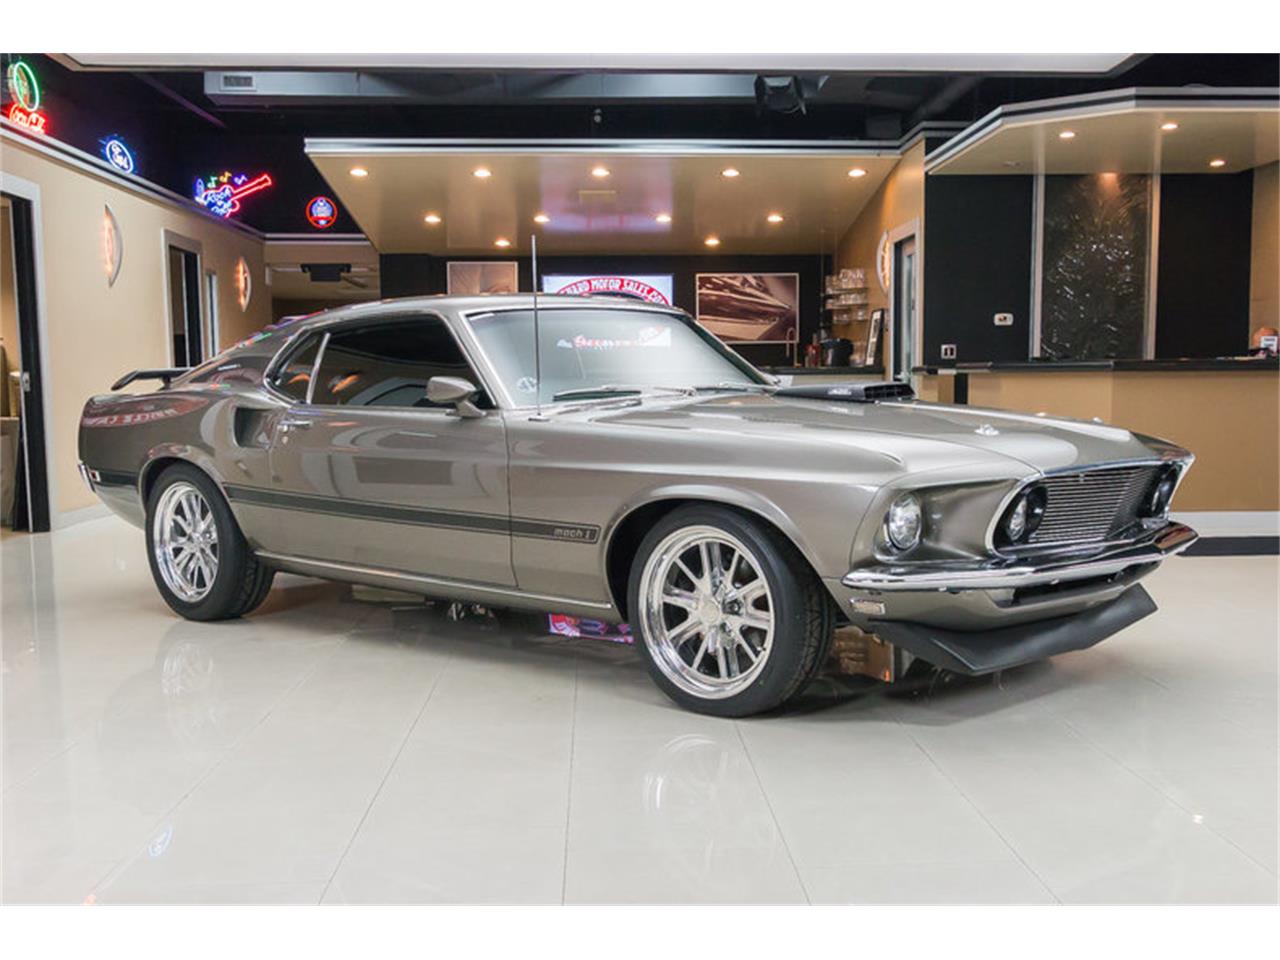 1969 Ford Mustang Mach 1 R Code for Sale | ClassicCars.com | CC-930426